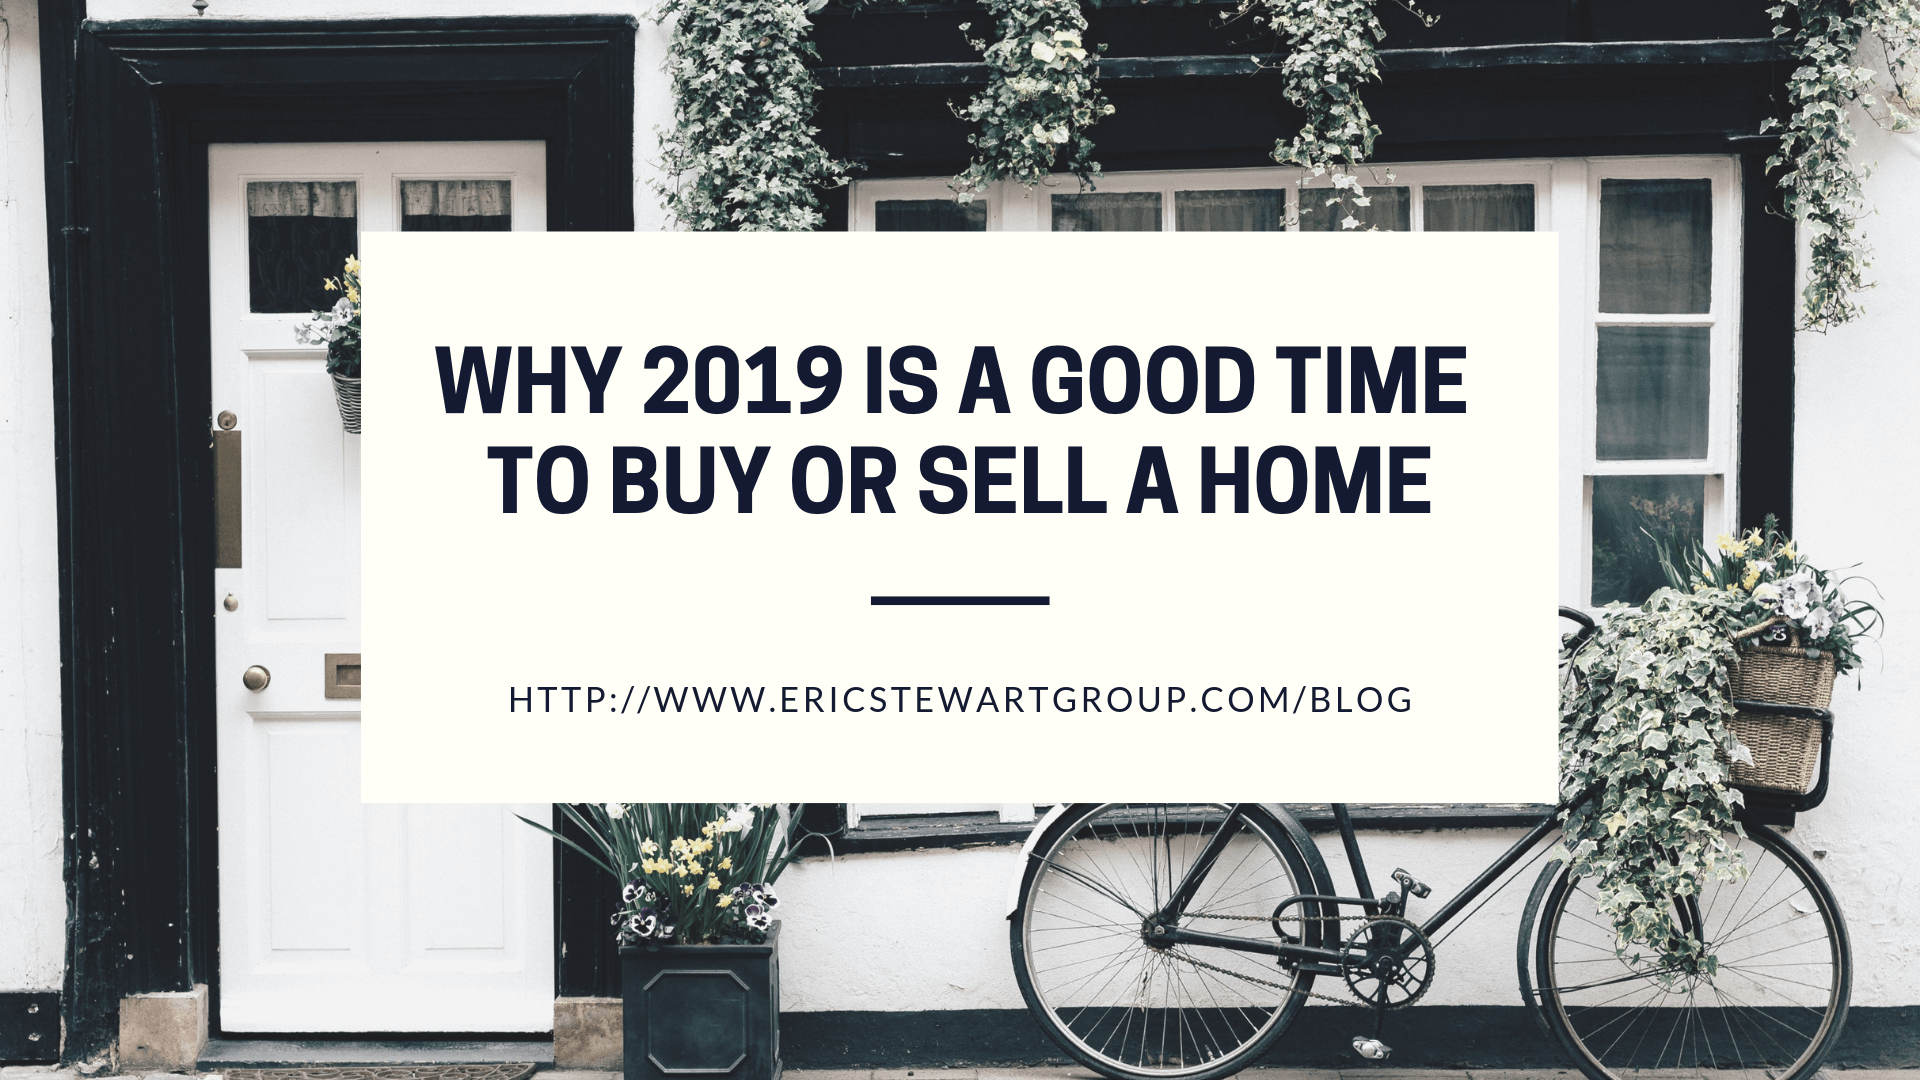 Copy of why 2019 is a good time to buy or sell a home